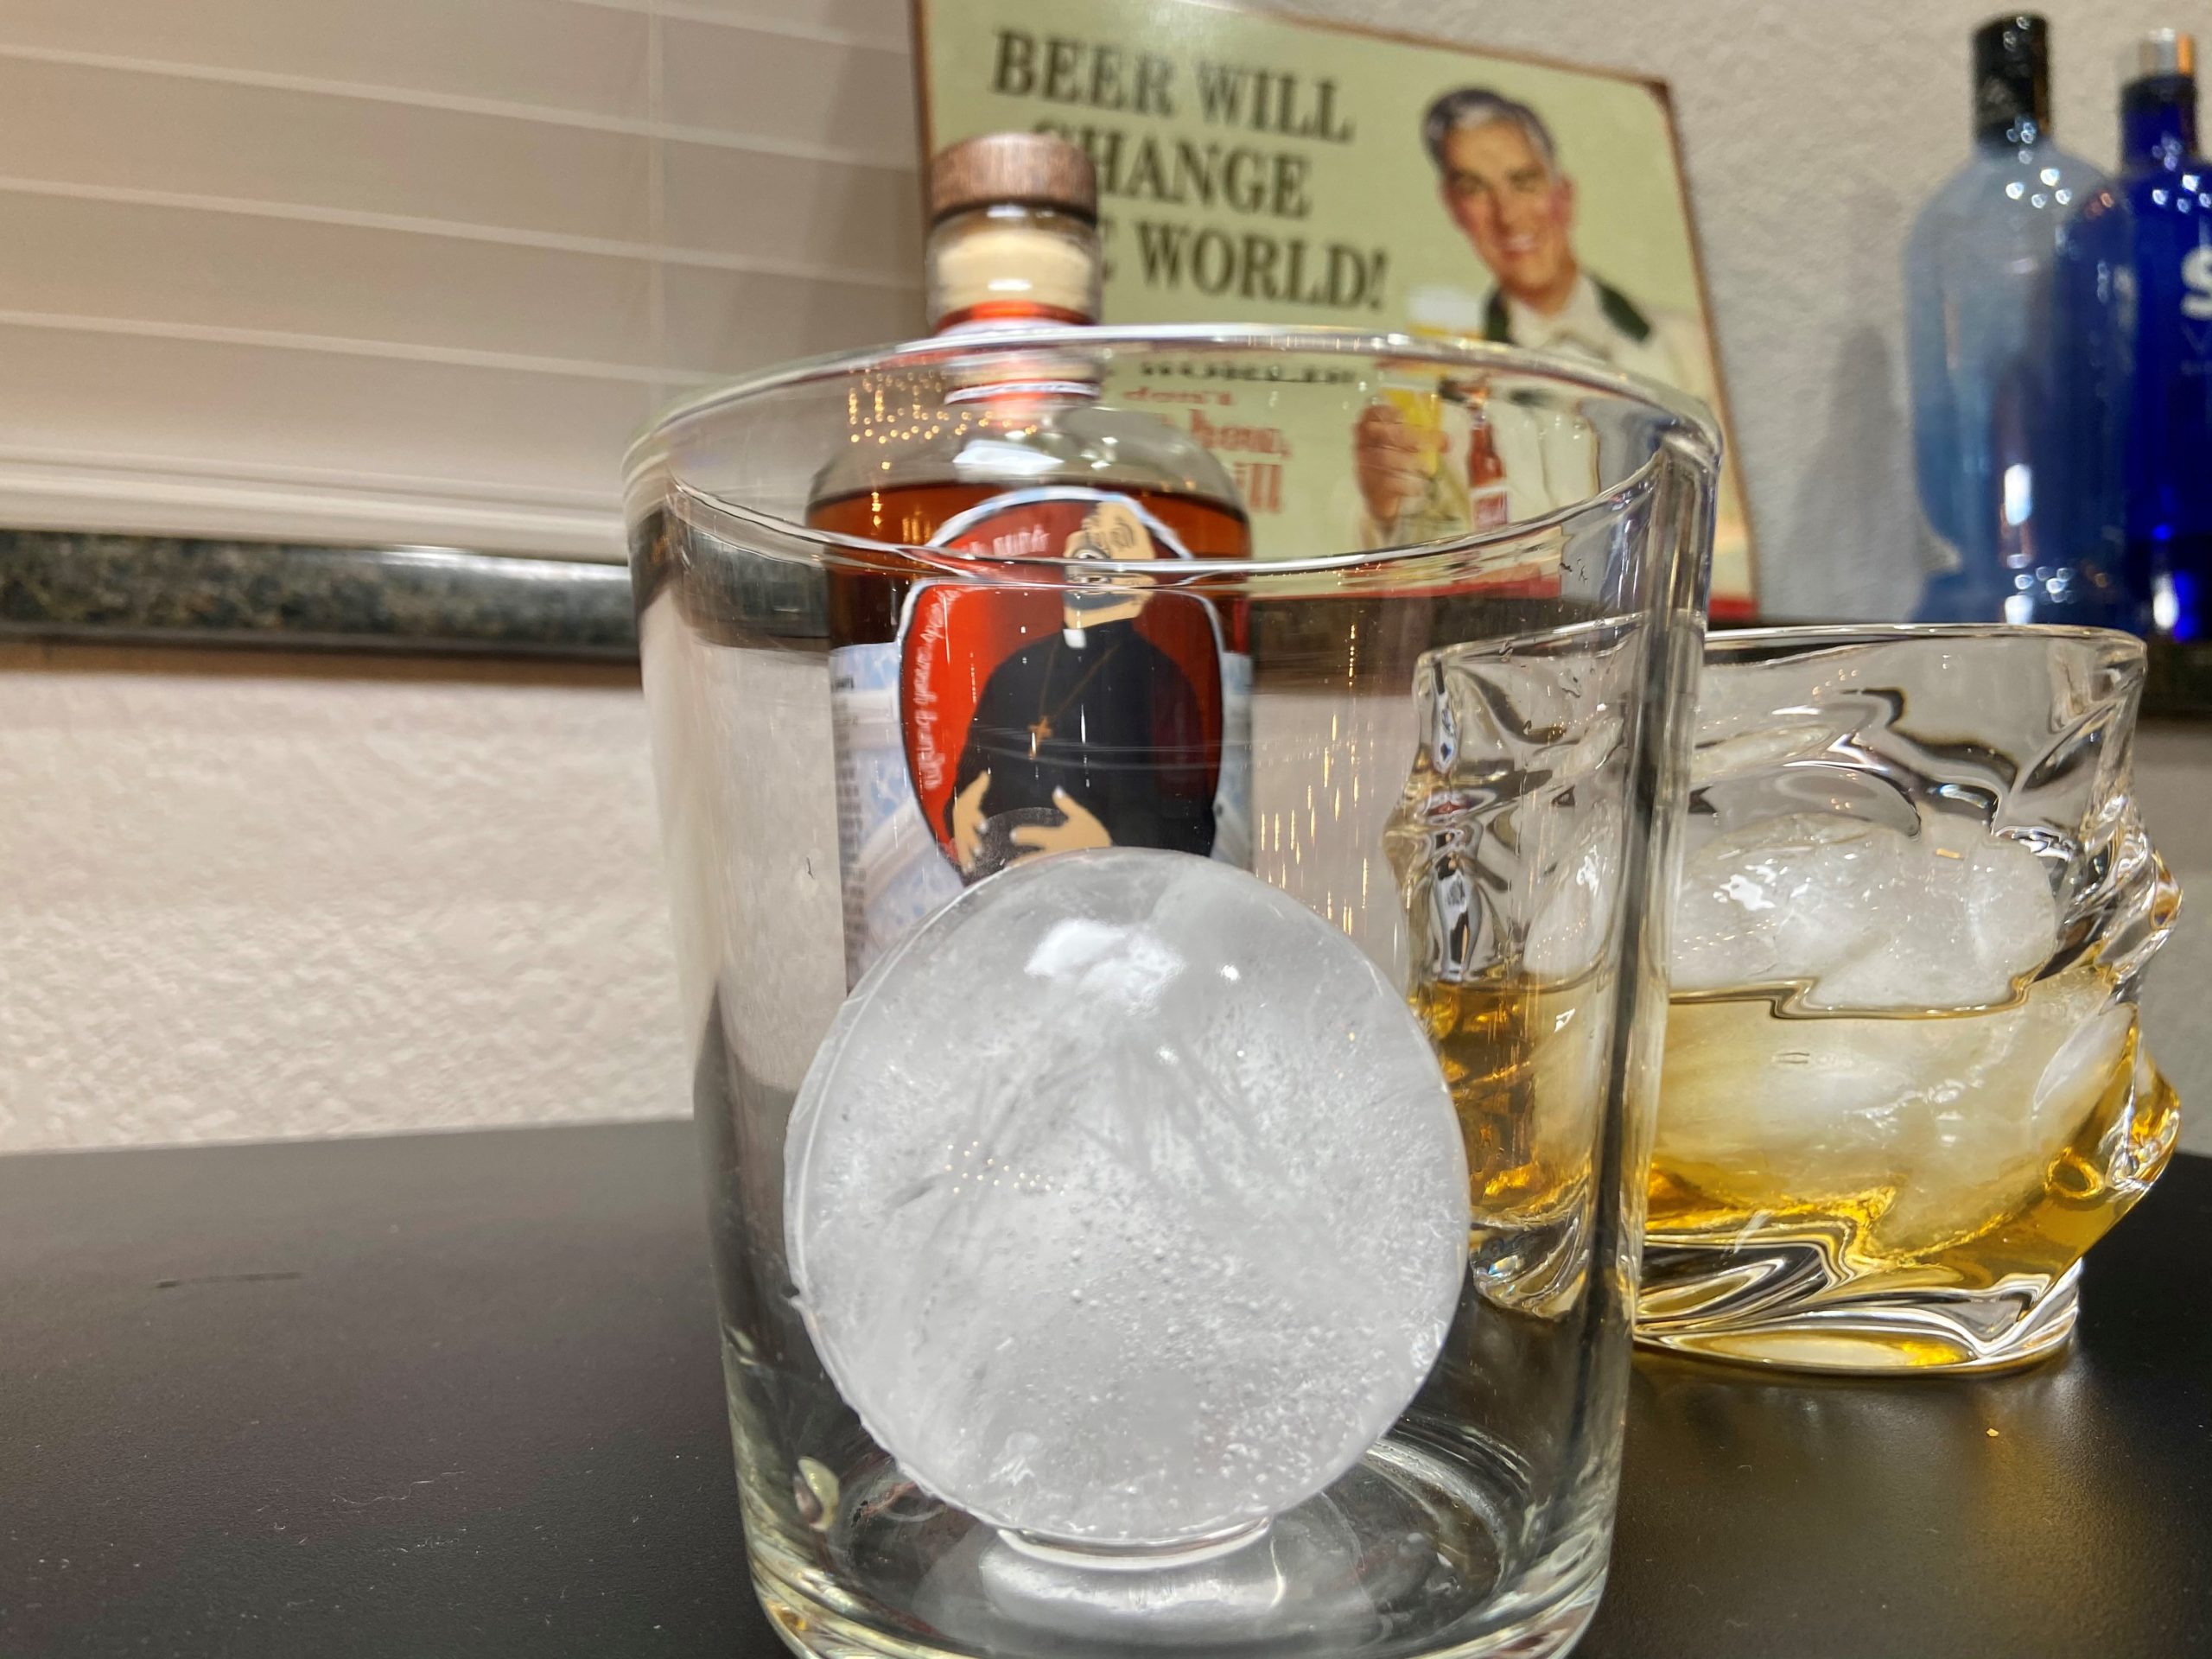 https://tailgating-challenge.com/wp-content/uploads/2020/12/Whiskey-Ice-Ball-scaled.jpg